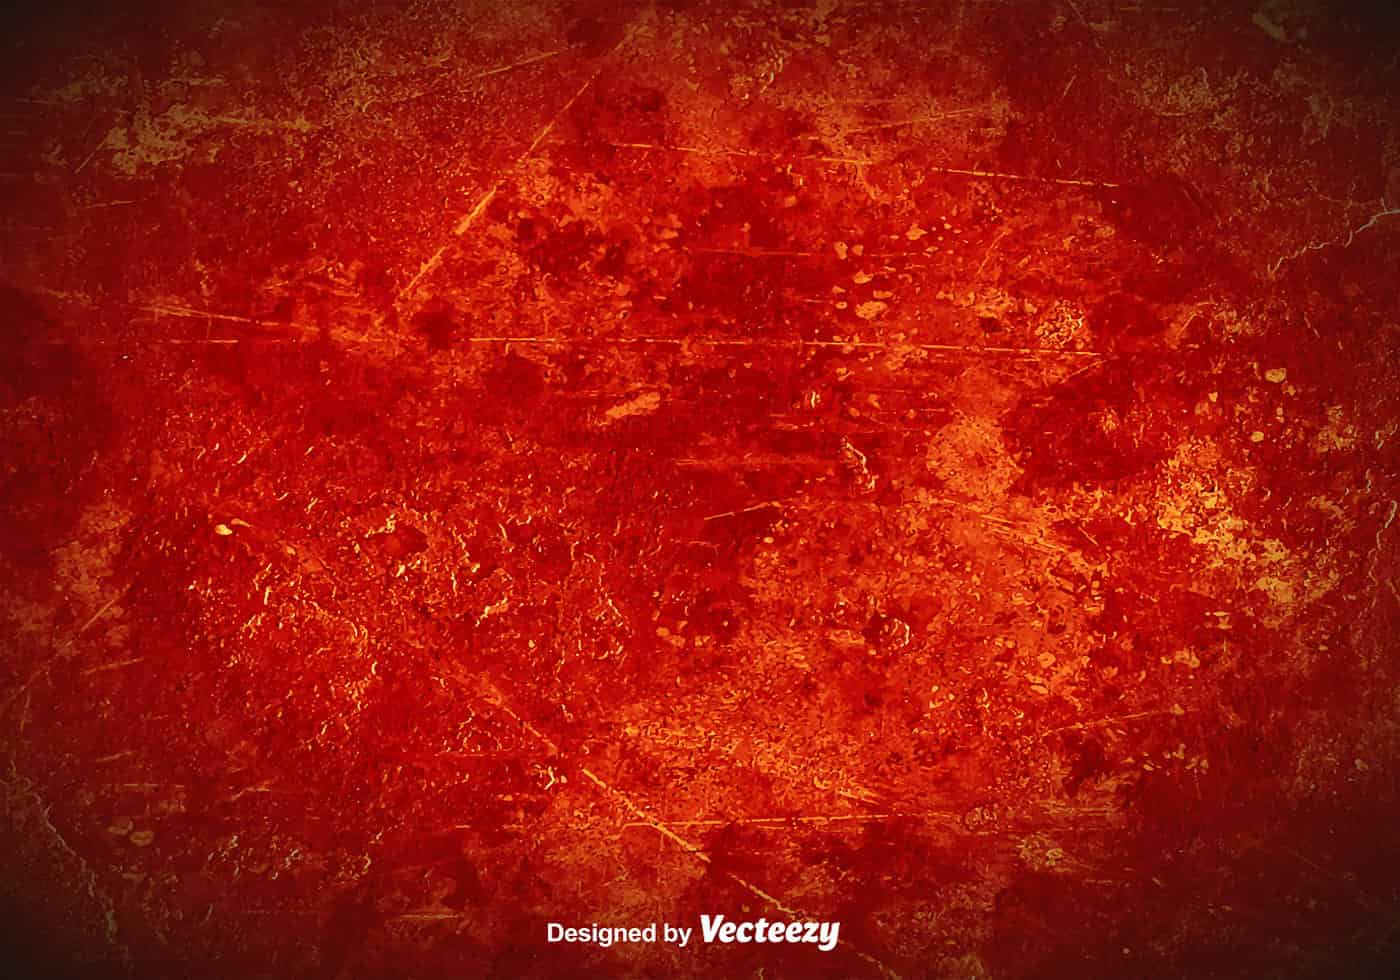 Vector Red Grunge Background Free Vector Art, Stock